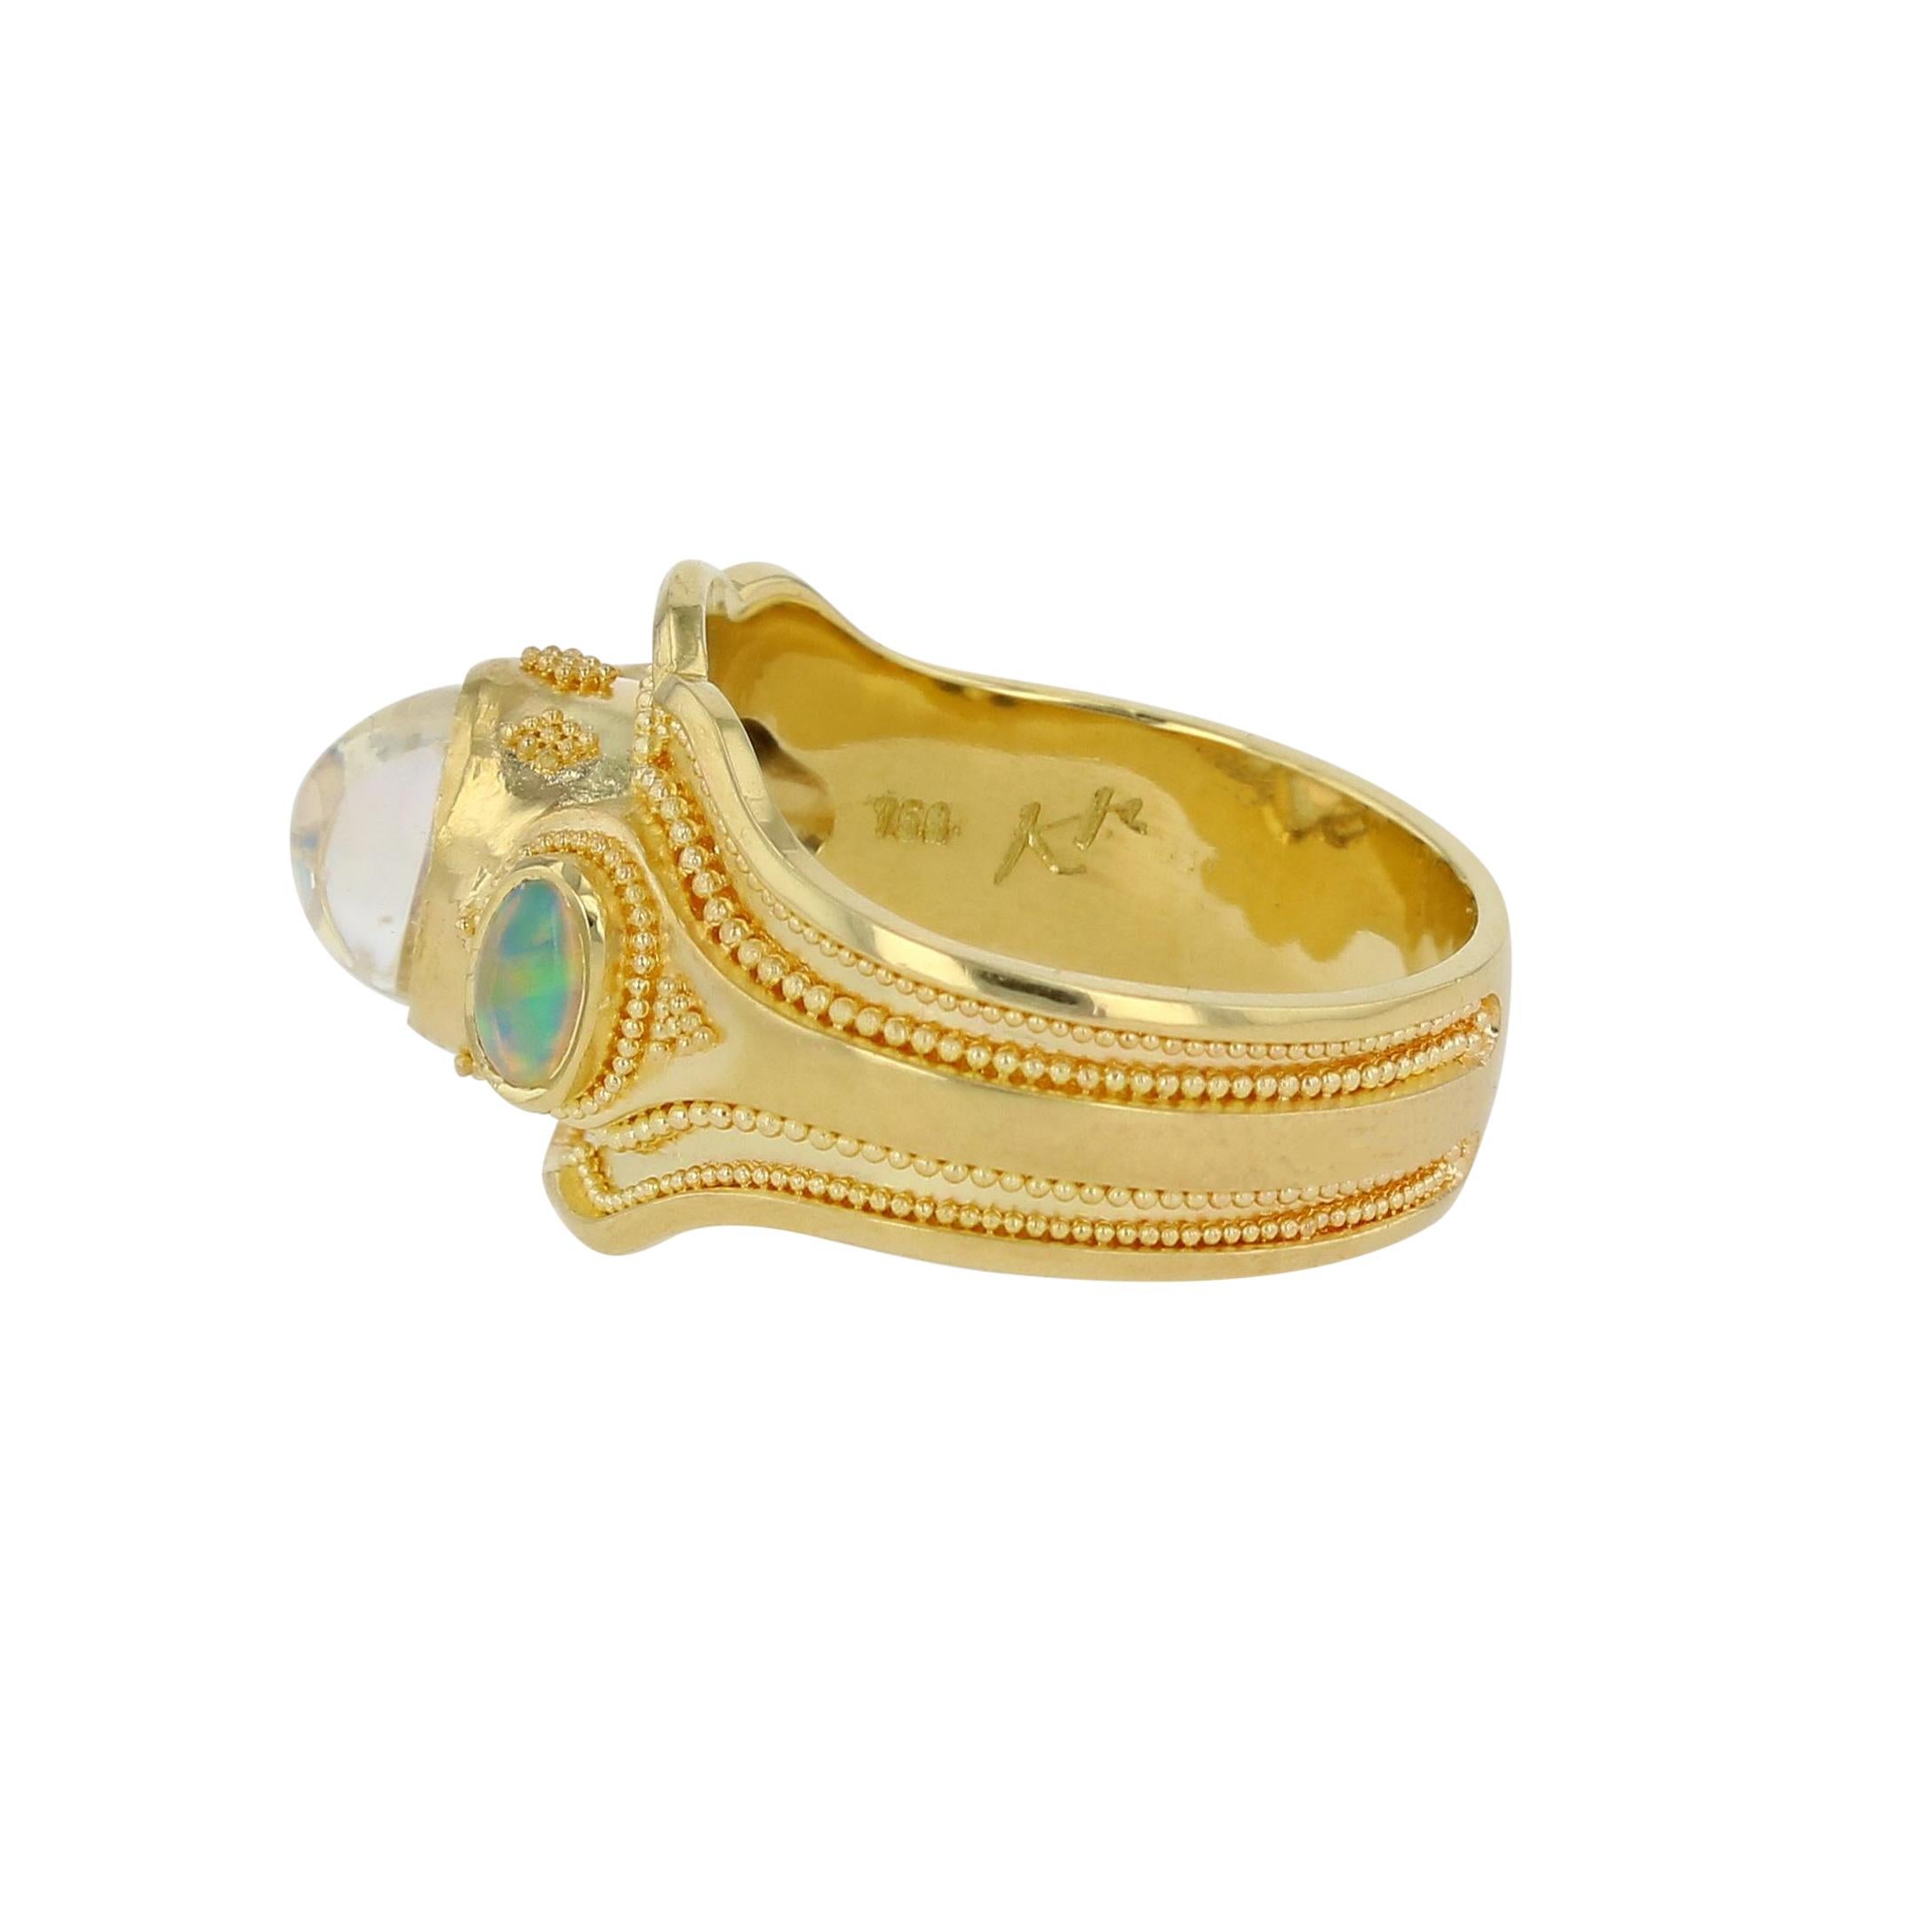 Women's or Men's Kent Raible 18Karat Gold Cocktail Ring with Moonstone, Opals,  Fine Granulation For Sale